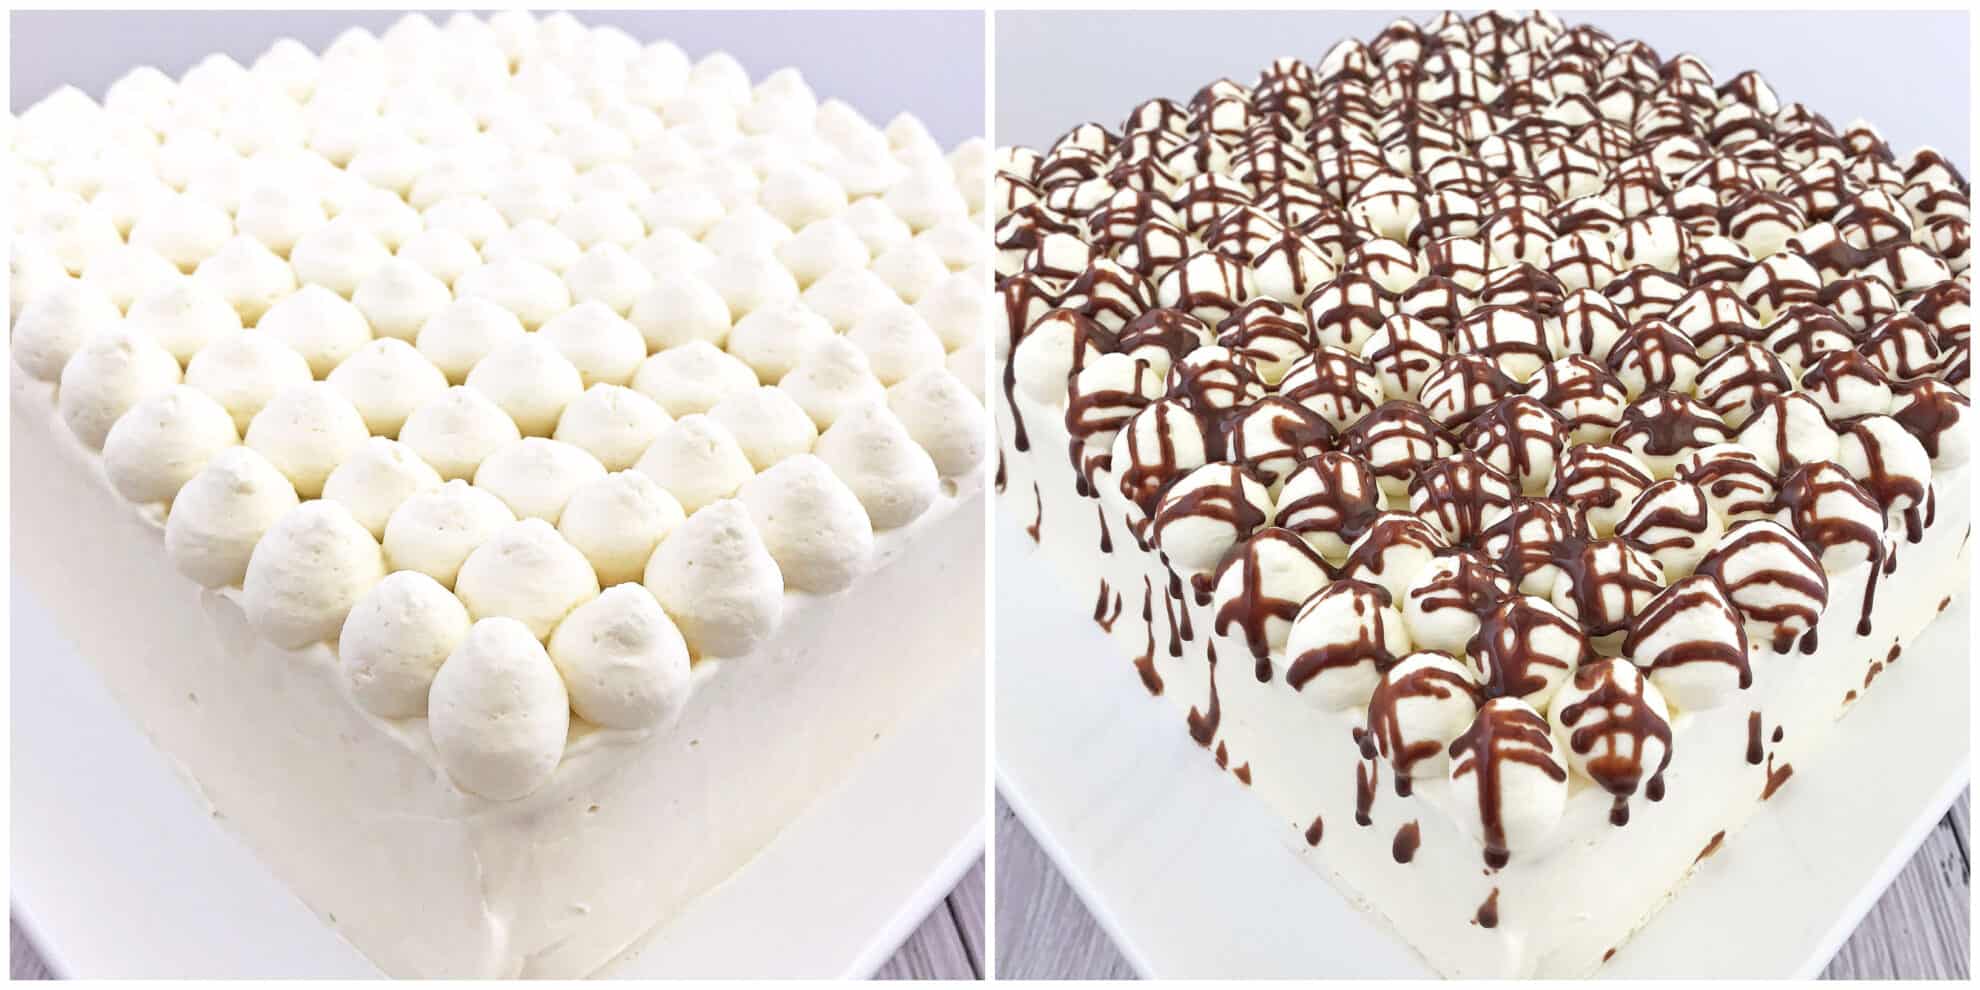 dust cocoa powder over the top of the cake and refrigerate for at least 4 hours before serving for the flavors to absorb and marshmallows to soften.